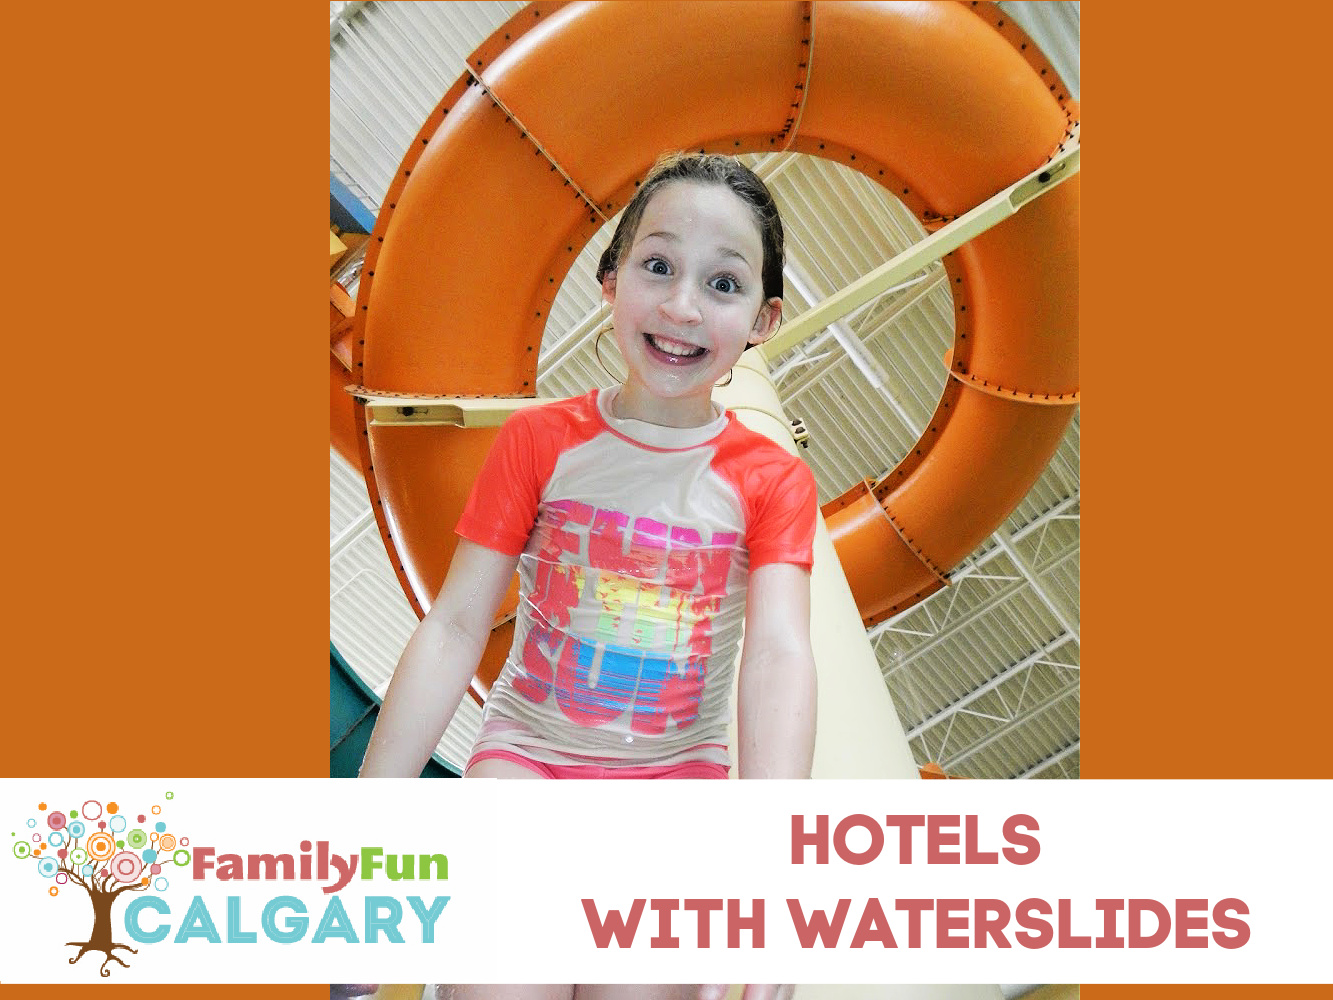 Hotels with Waterslides (Family Fun Calgary)